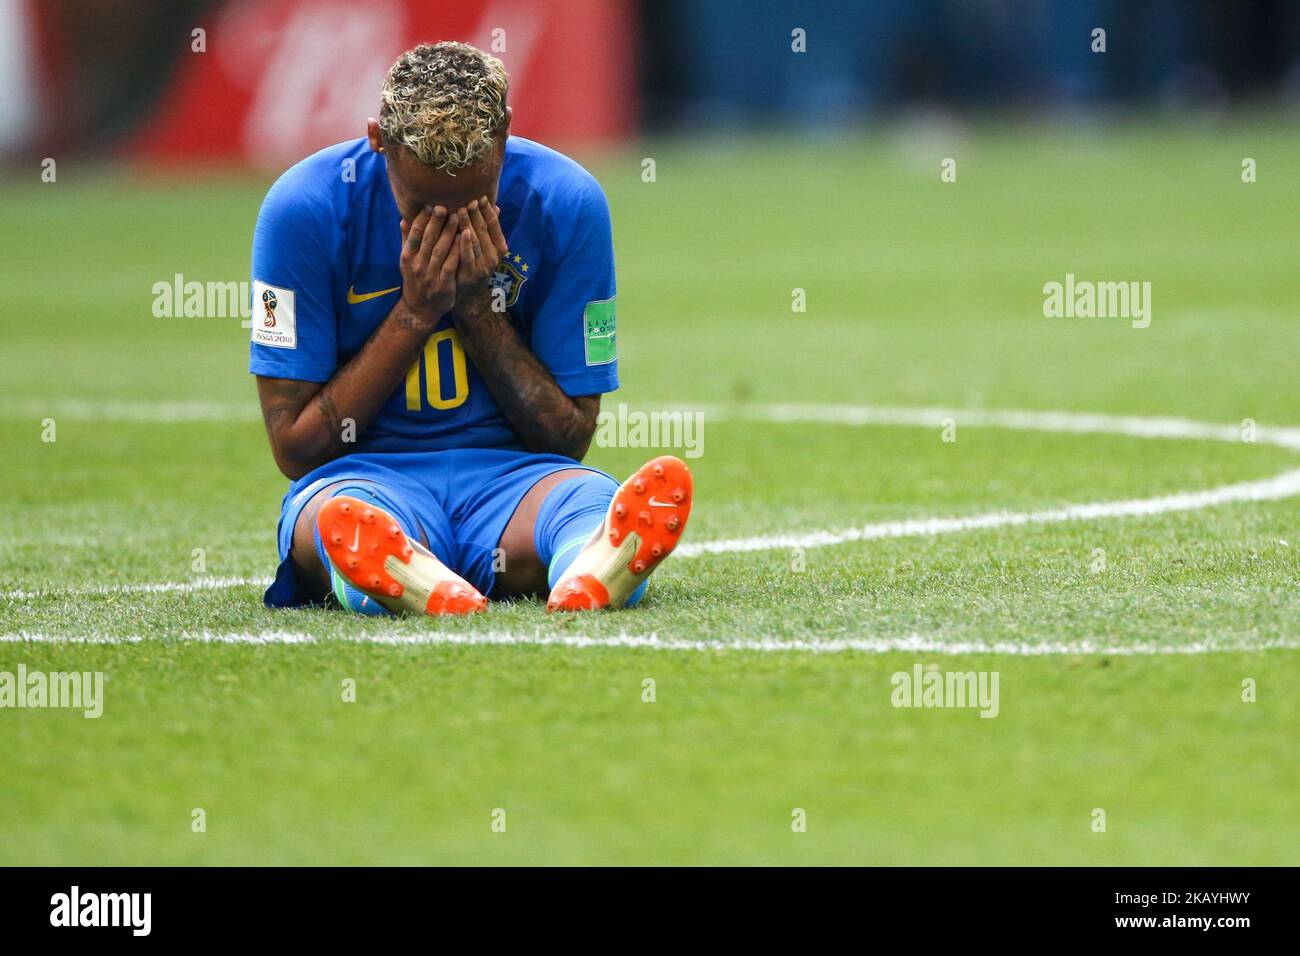 Neymar of the Brazil national football team reacts after scoring a goal during the 2018 FIFA World Cup match, first stage - Group E between Brazil and Costa Rica at Saint Petersburg Stadium on June 22, 2018 in St. Petersburg, Russia. (Photo by Igor Russak/NurPhoto) Stock Photo